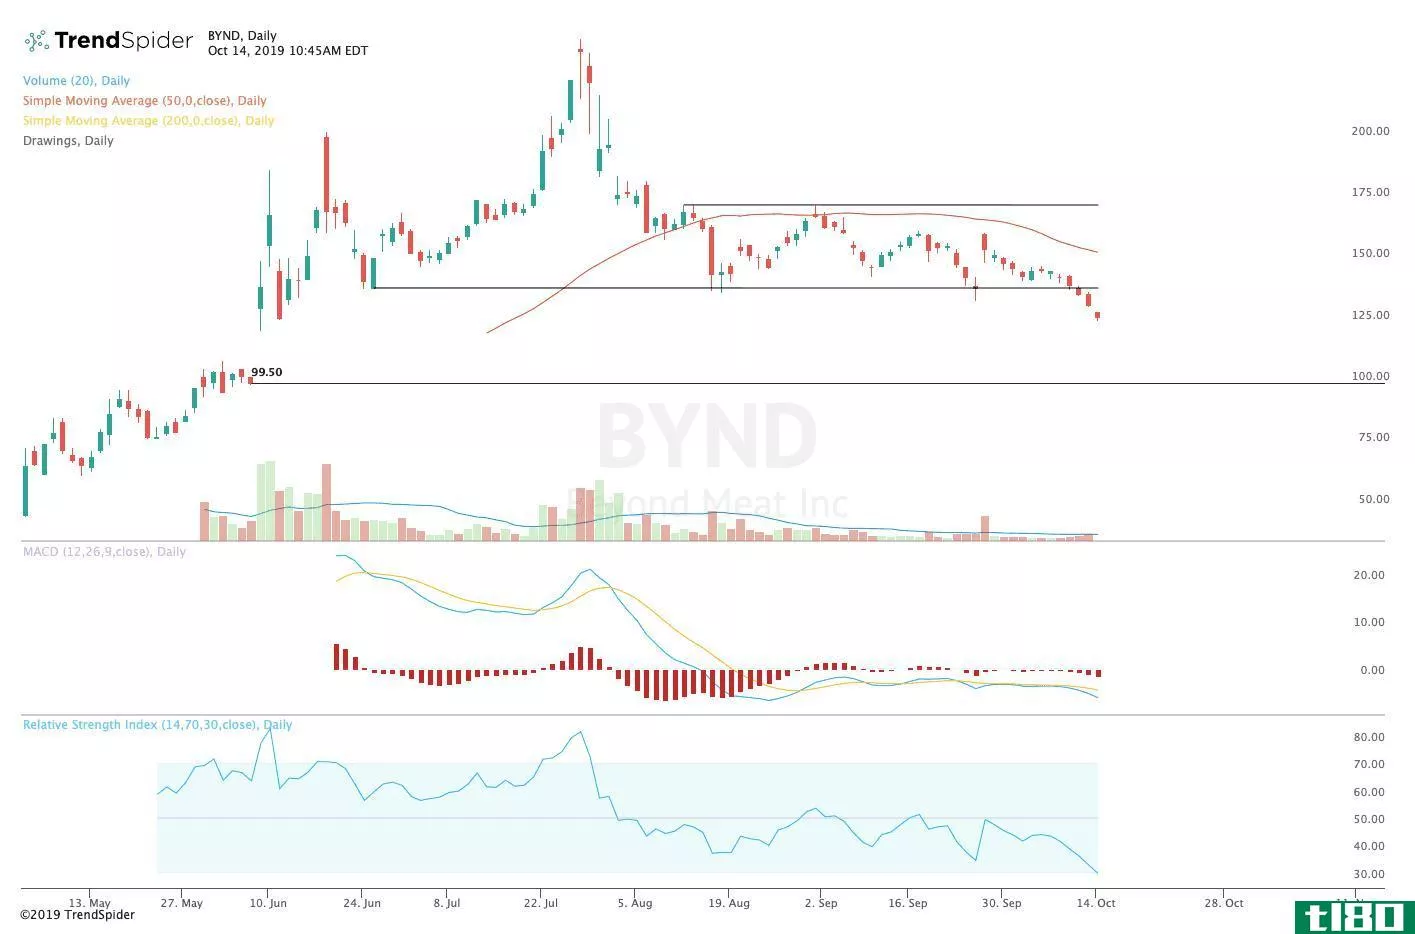 Chart showing the share price performance of Beyond Meat, Inc. (BYND)